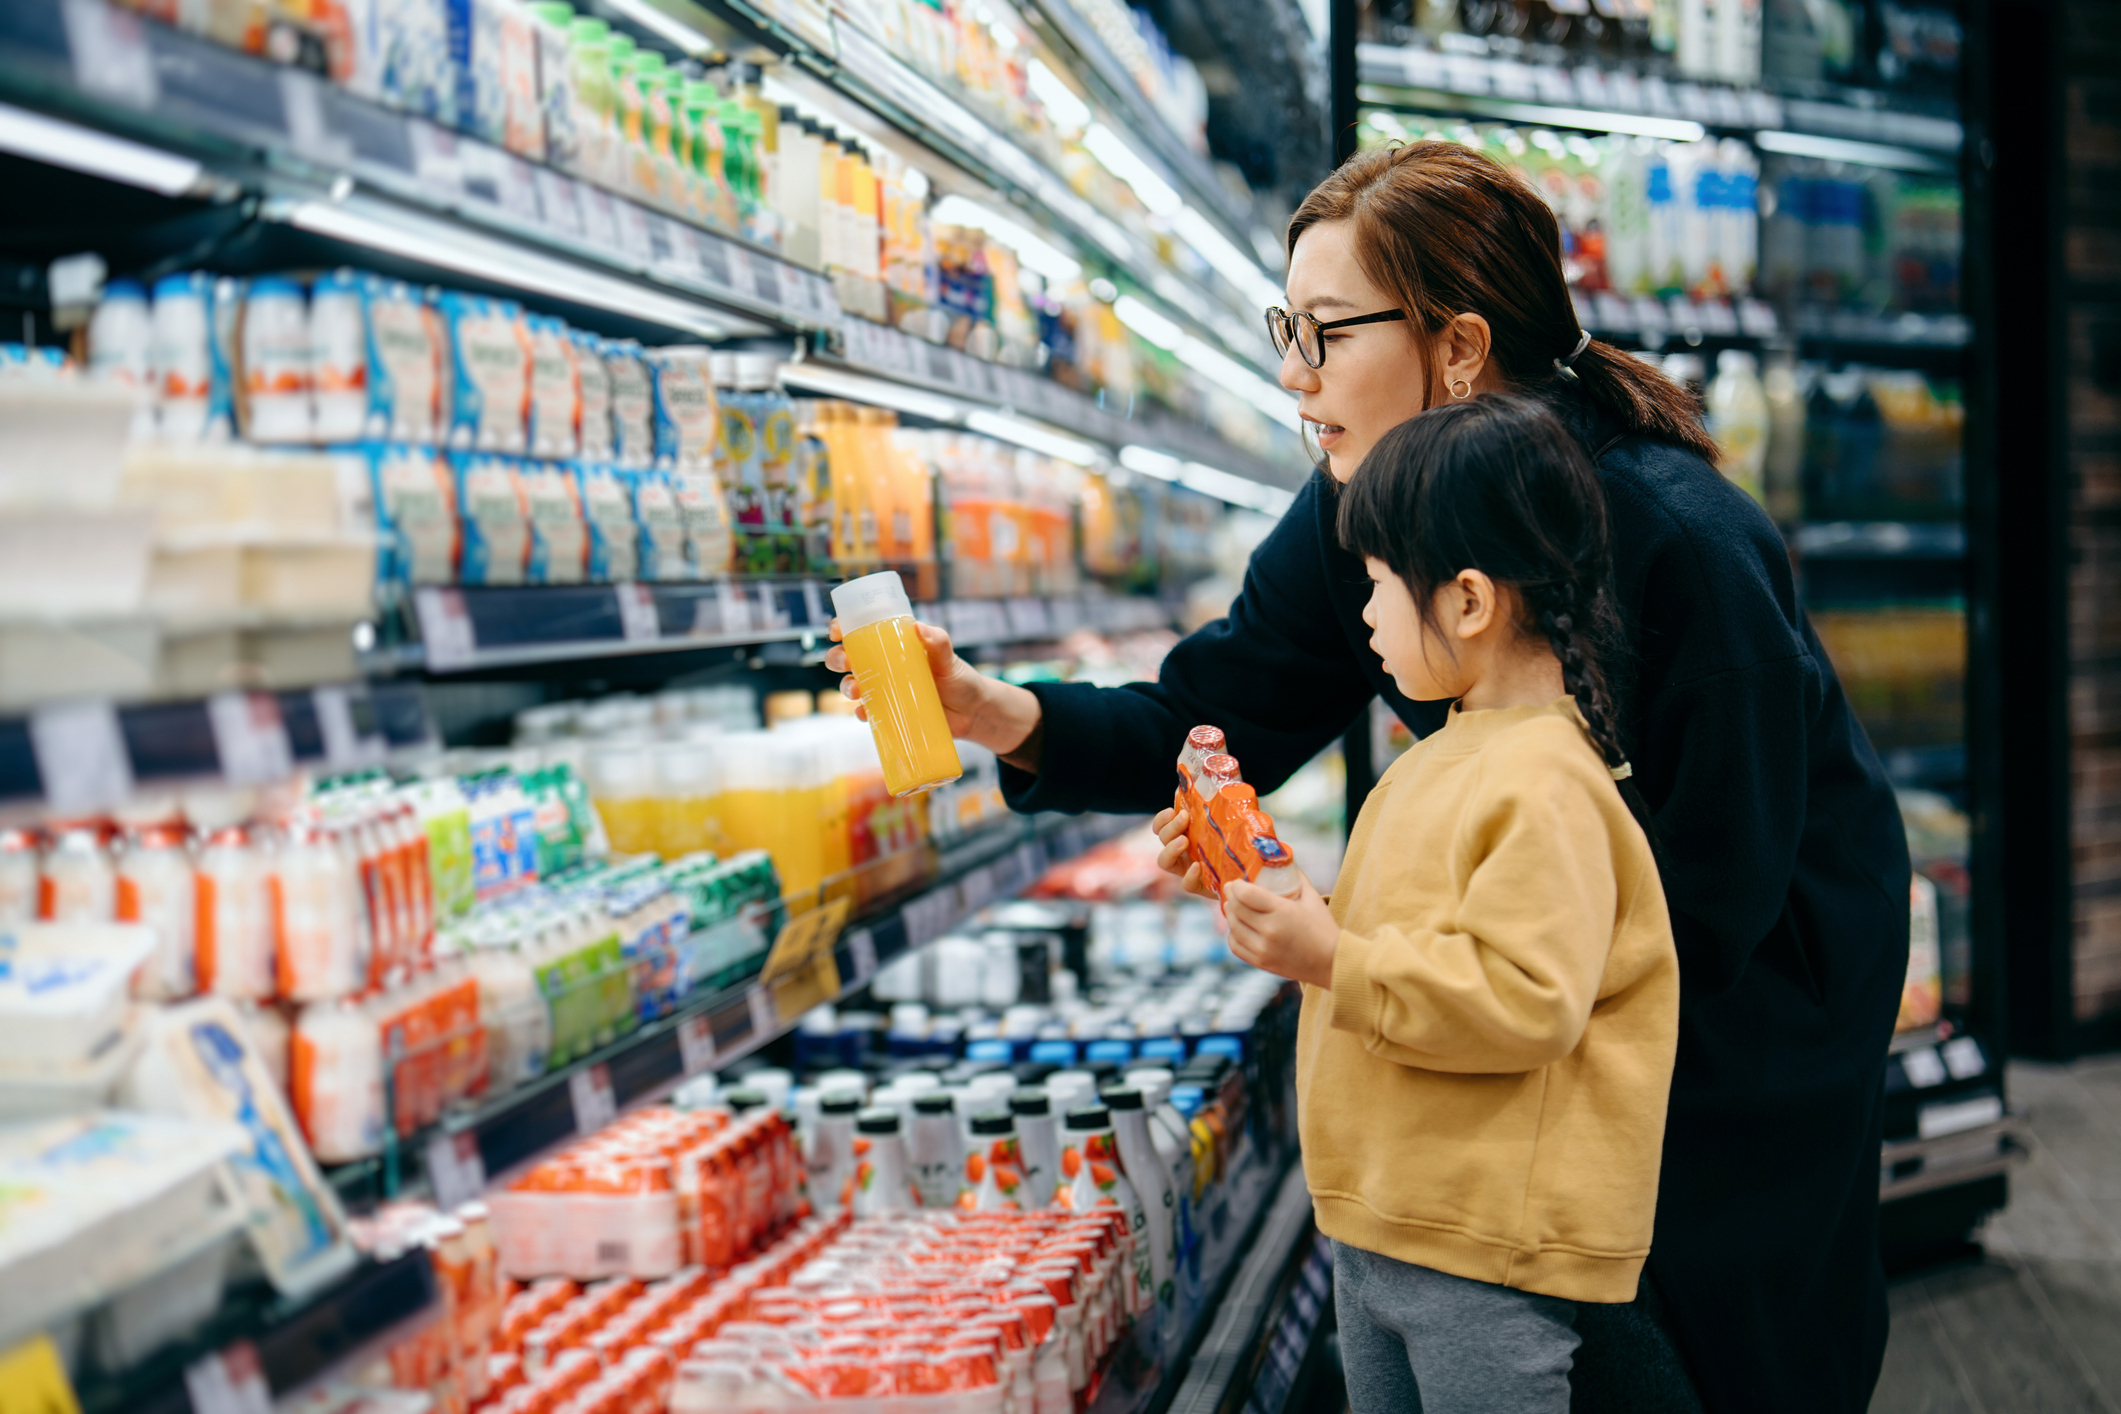 Adult and child selecting beverages from grocery store refrigerator section